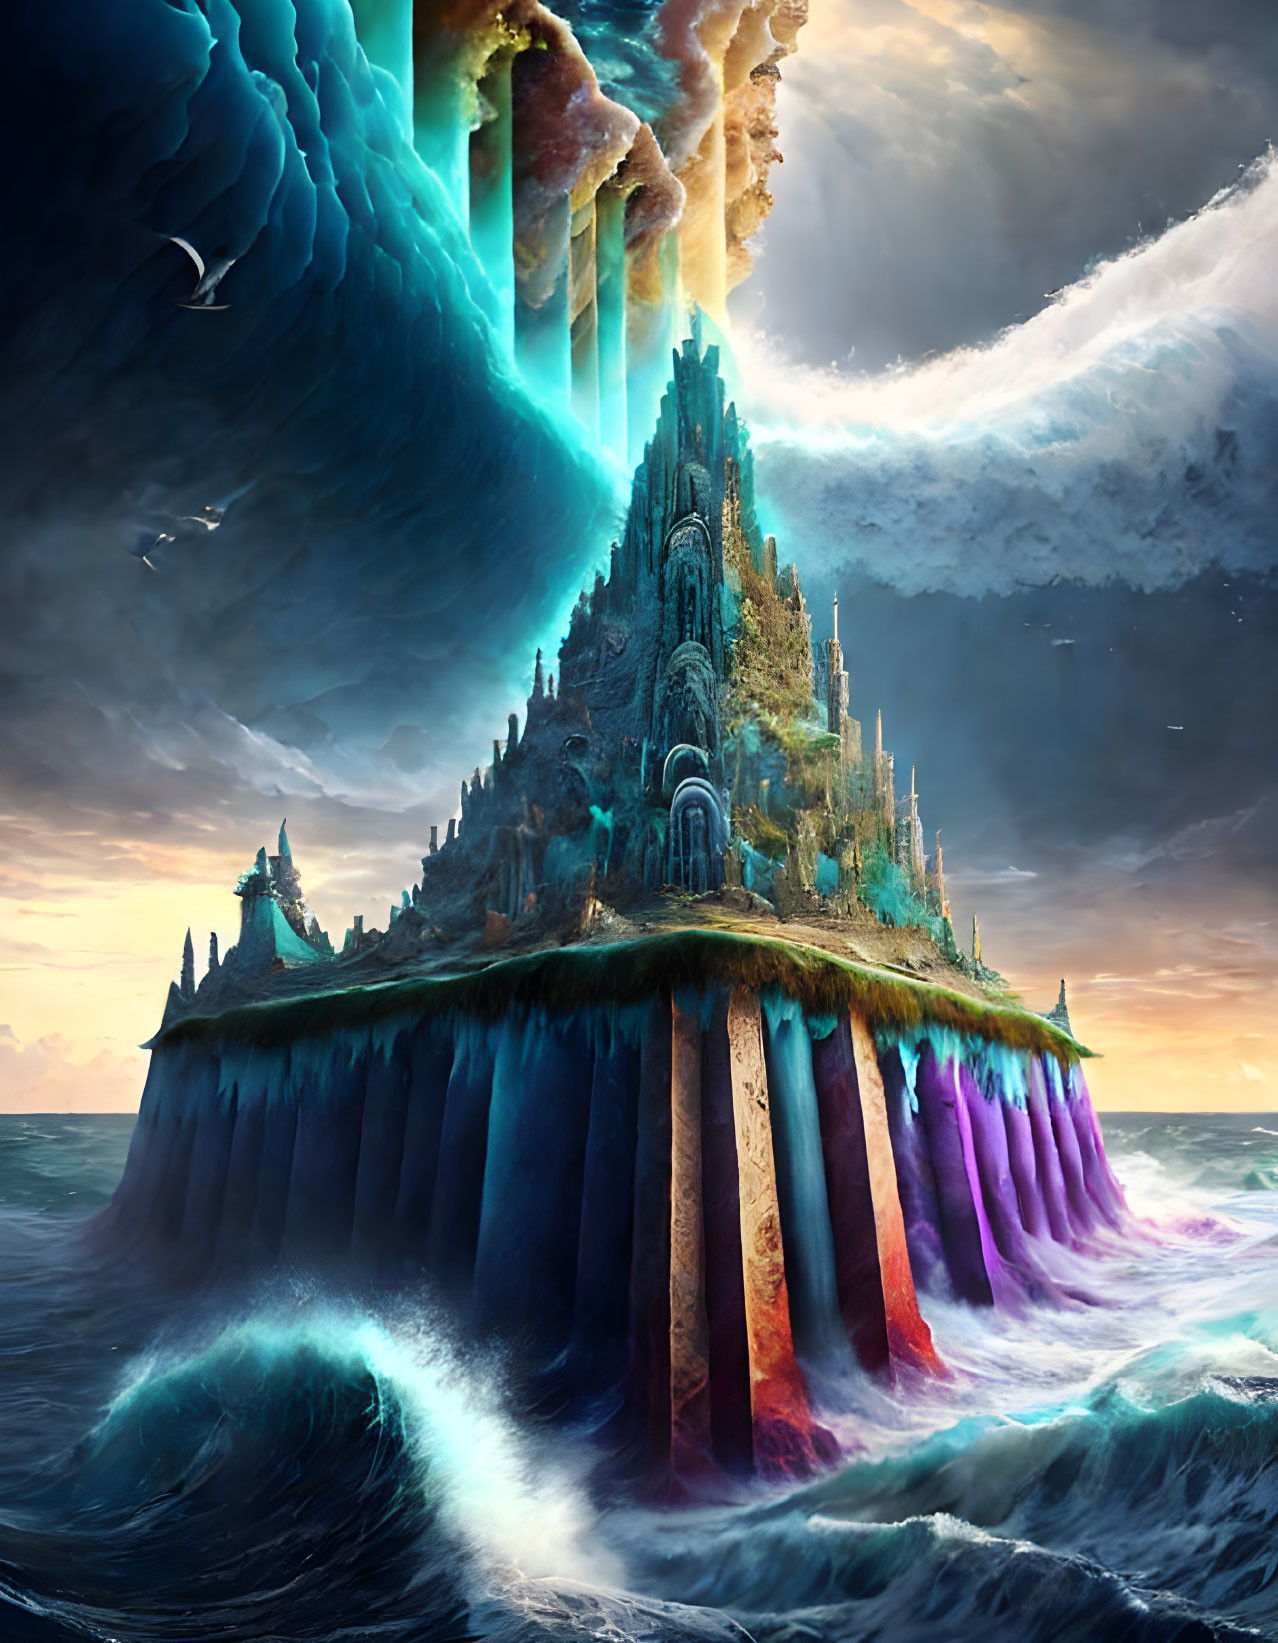 Fantastical island with towering castle, cascading waterfalls, turbulent seas, surreal sky.